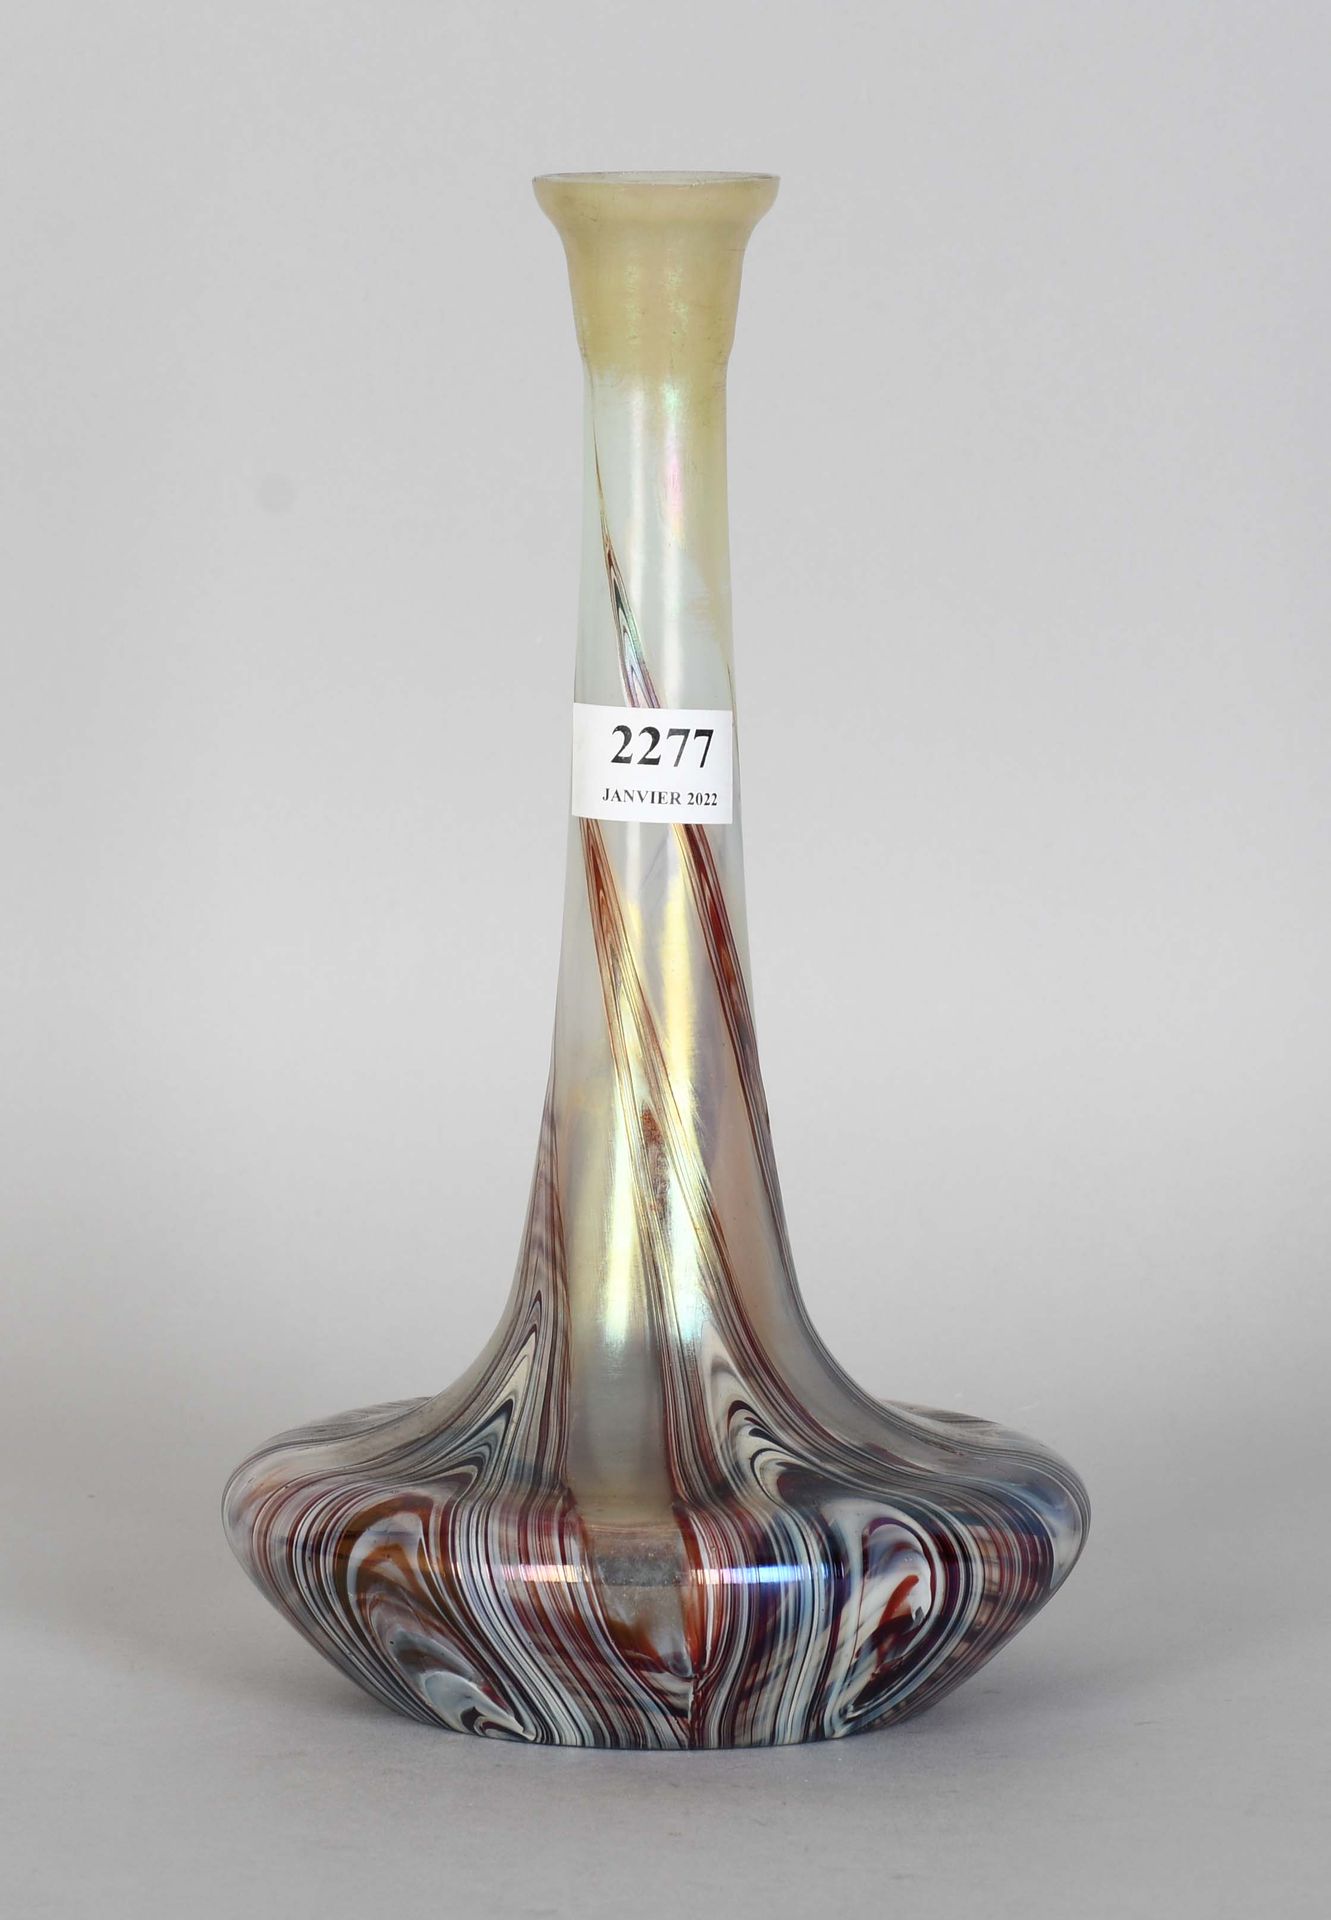 Null Vase 1900 in glass "Loetz", tinted and iridescent

Height : 30 cm.